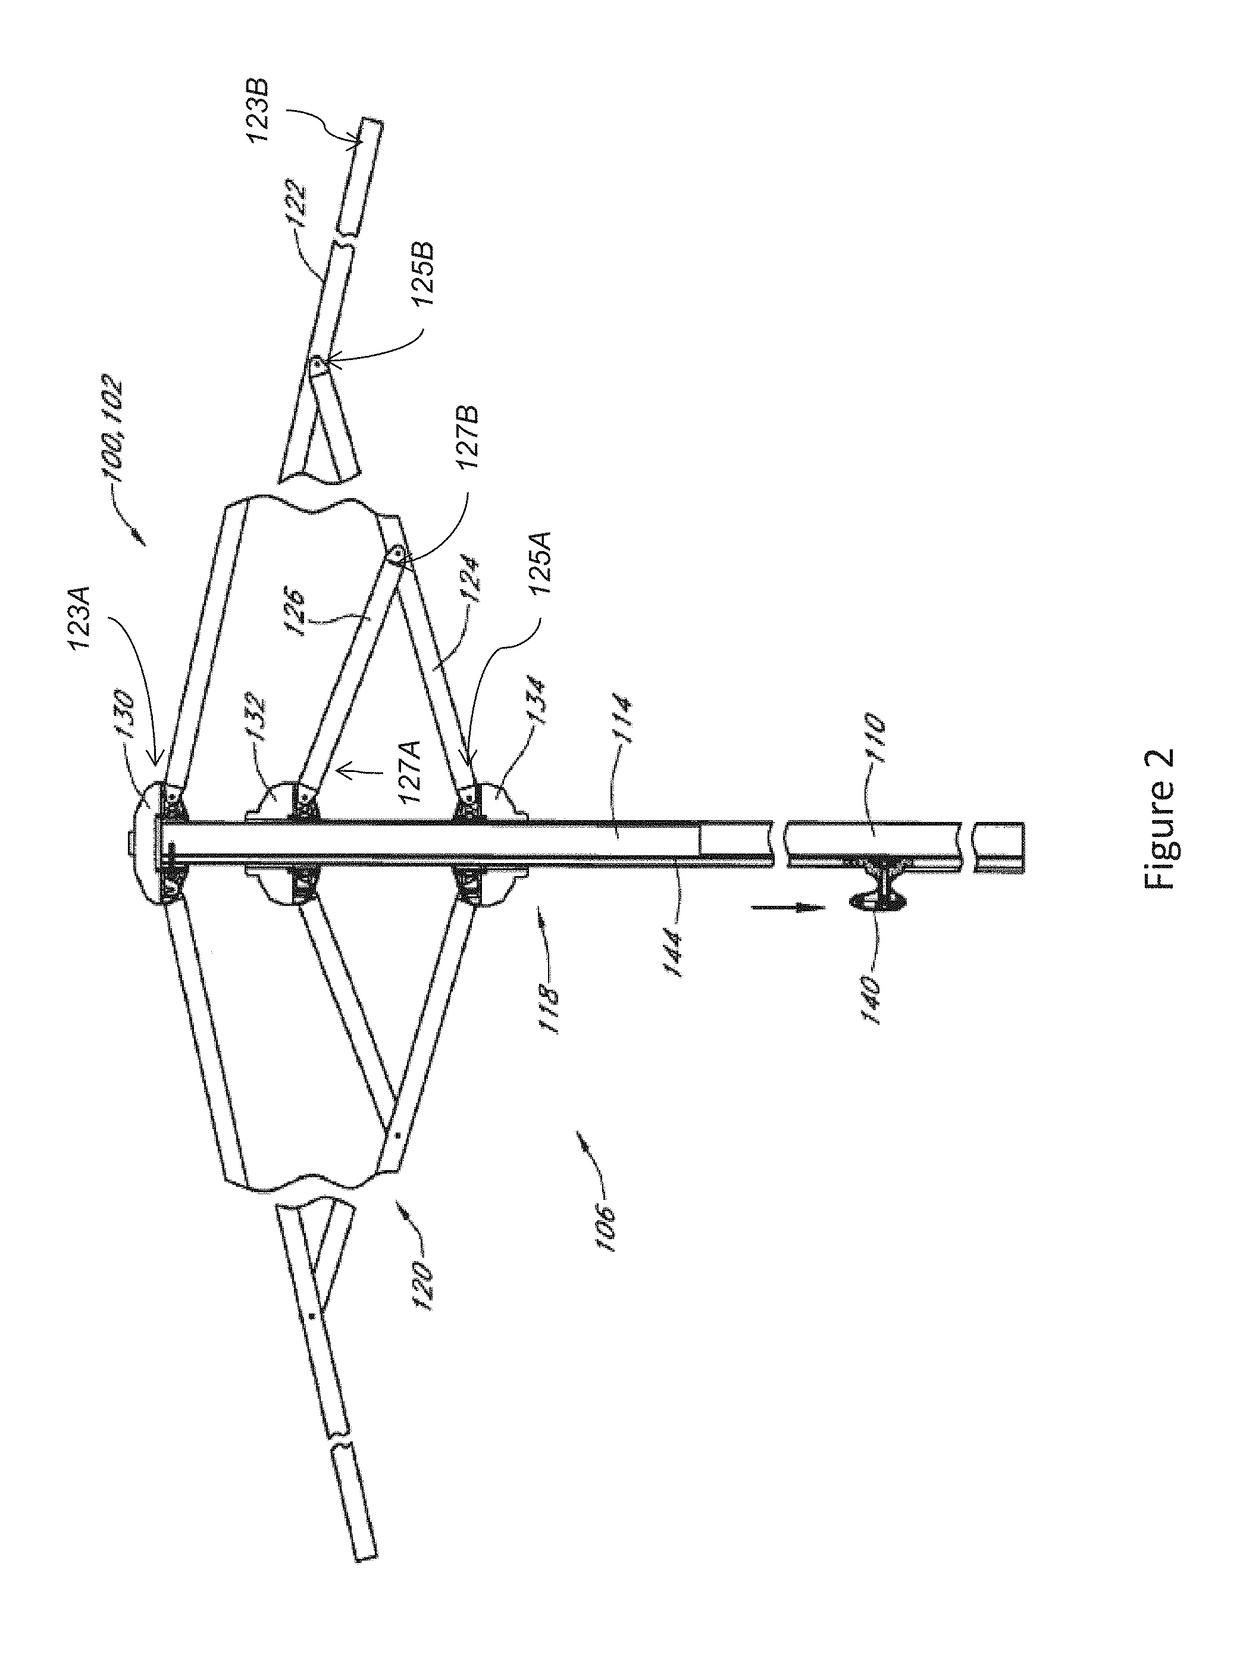 Umbrella assembly set up devices